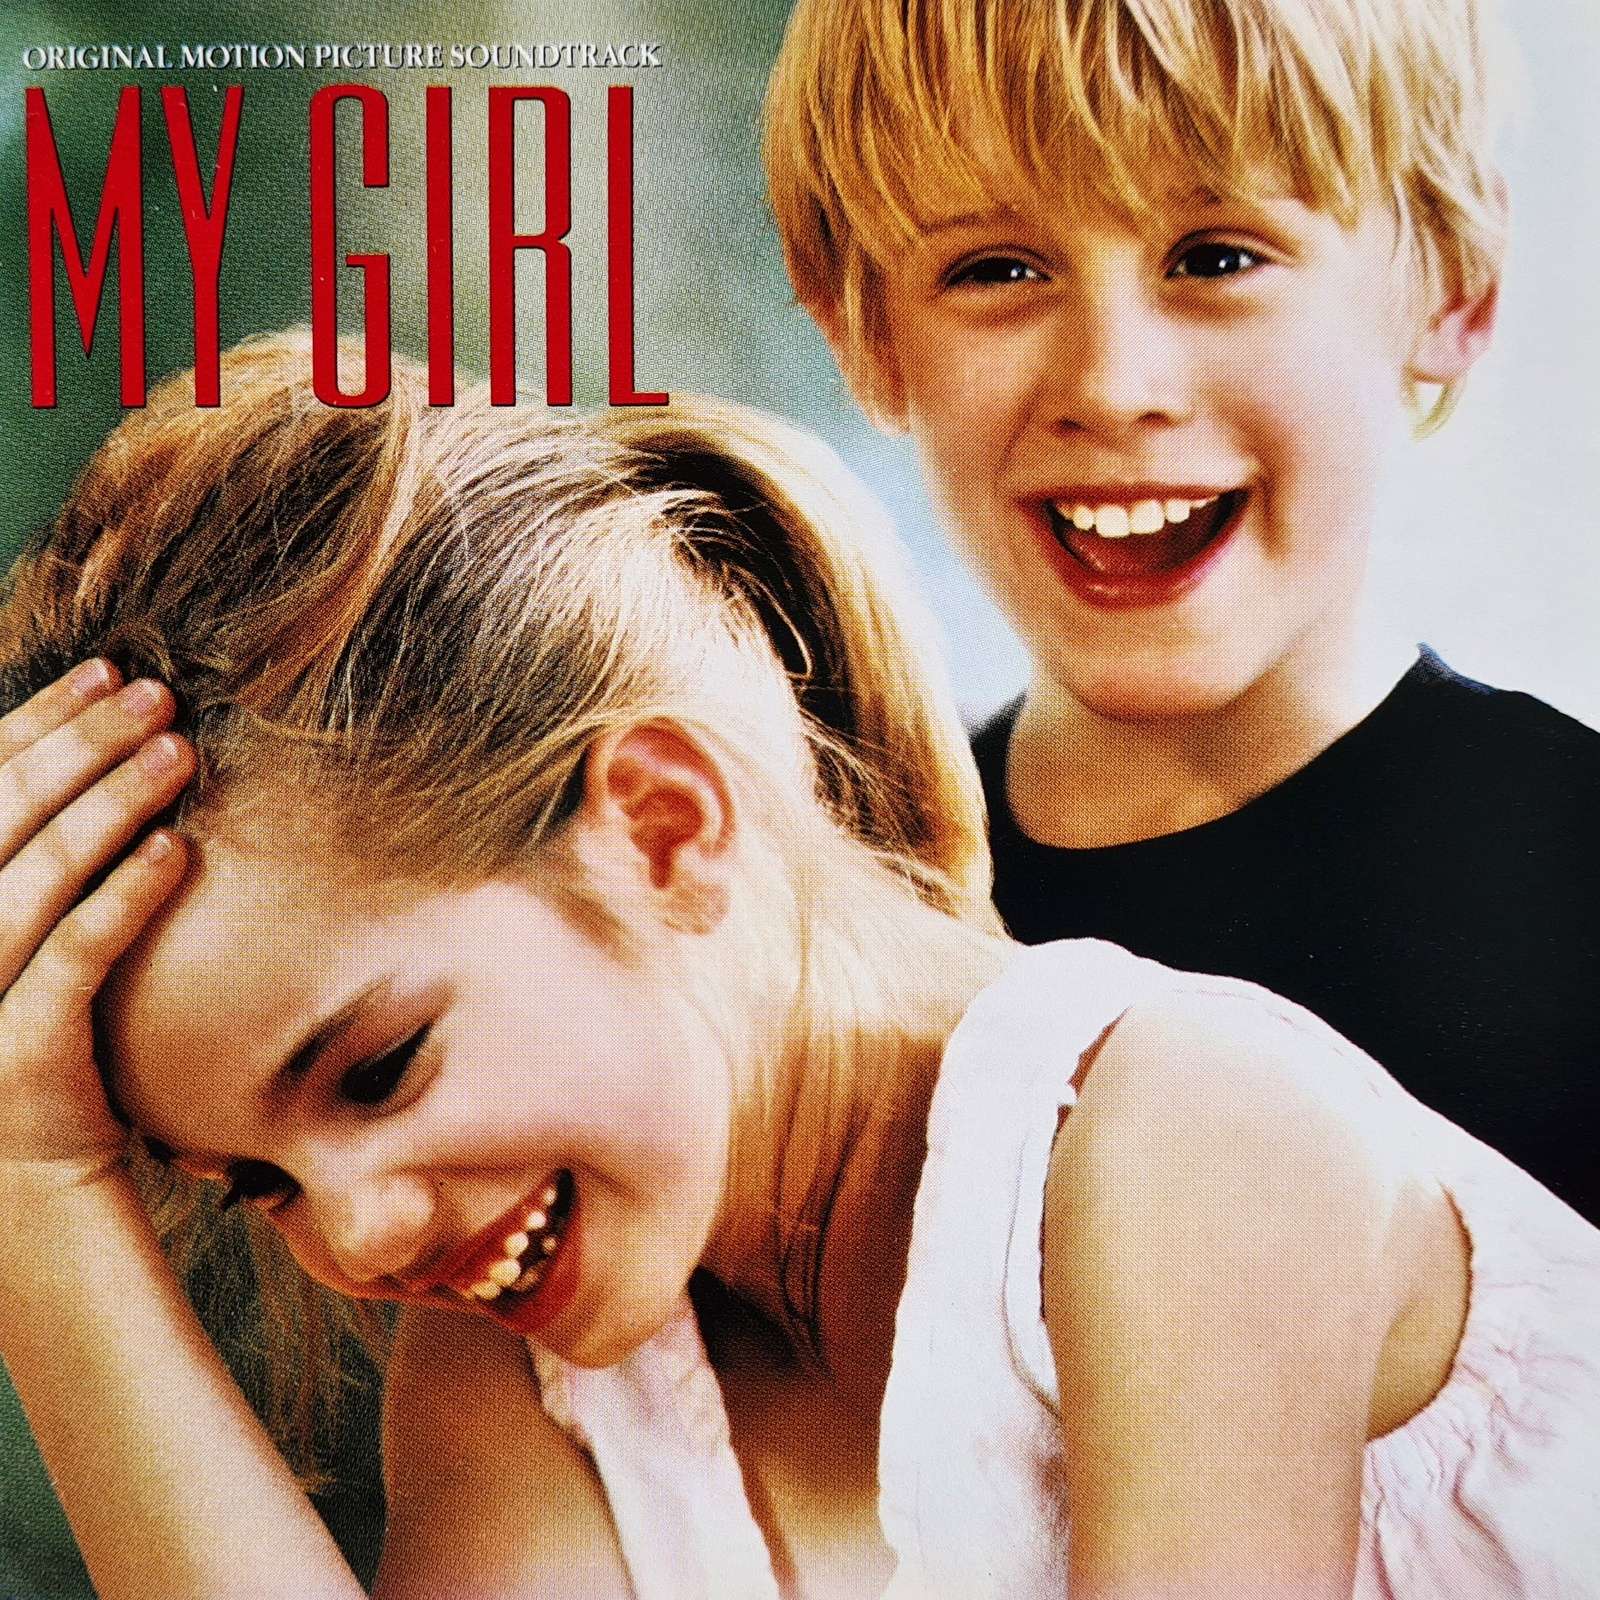 My Girl - Original Motion Picture Soundtrack (CD)